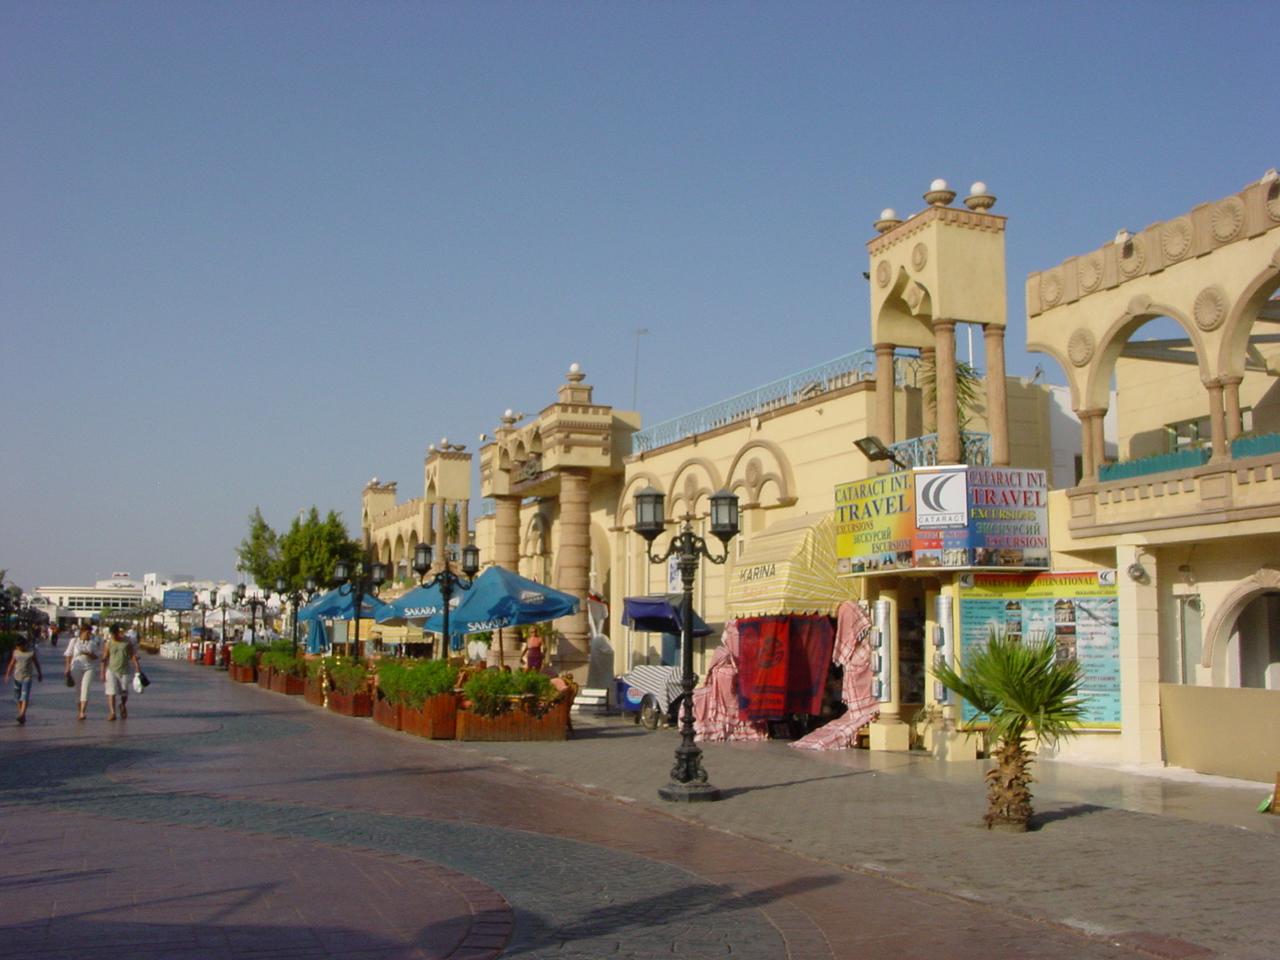 Sharm el-Sheikh, Egypt's premier resort, is available at unprecedented low fares